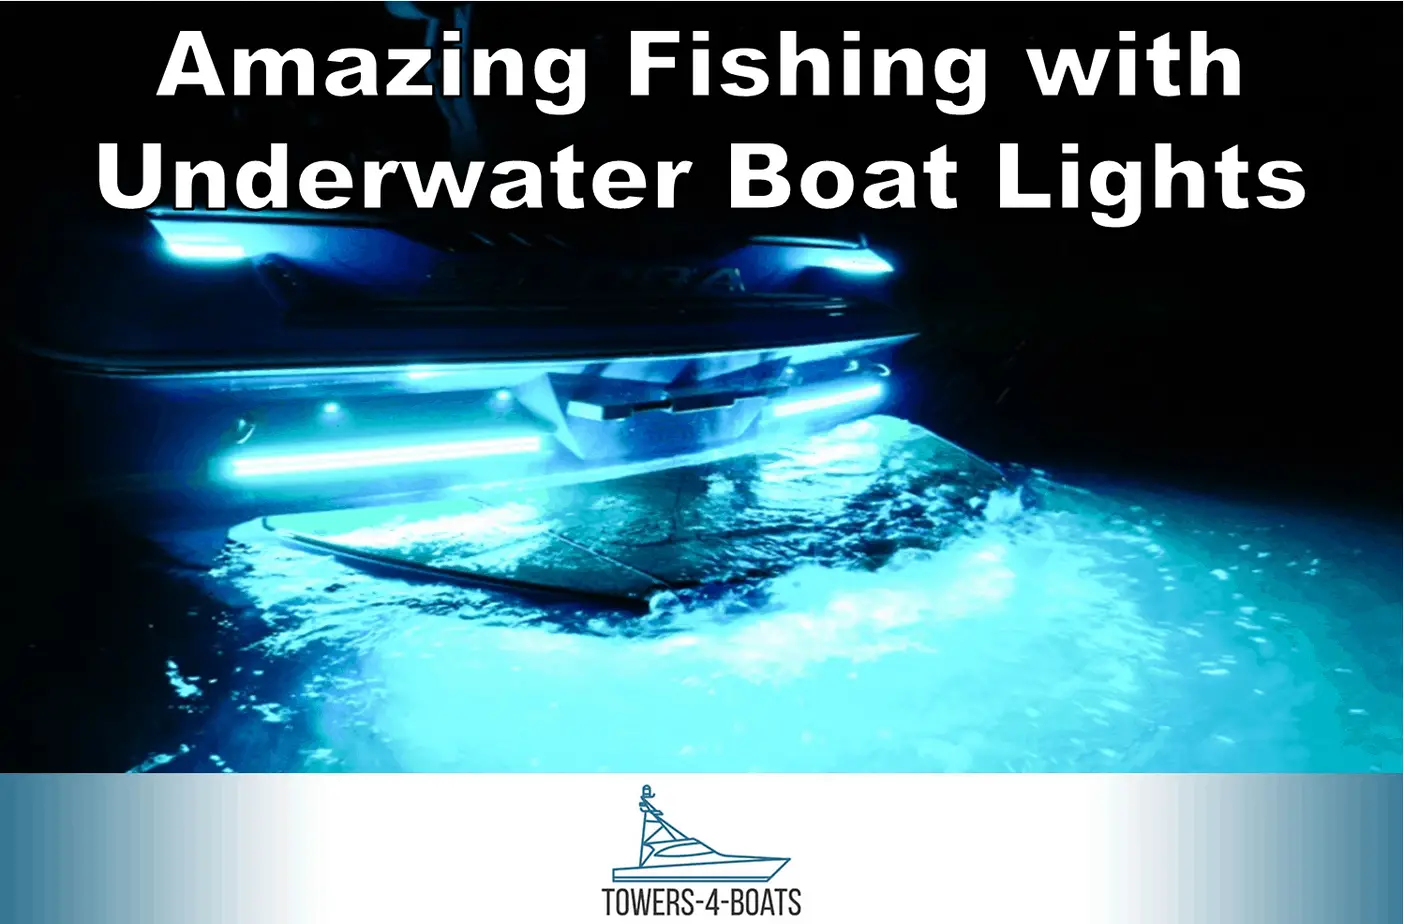 Amazing Fishing with Underwater Boat Lights